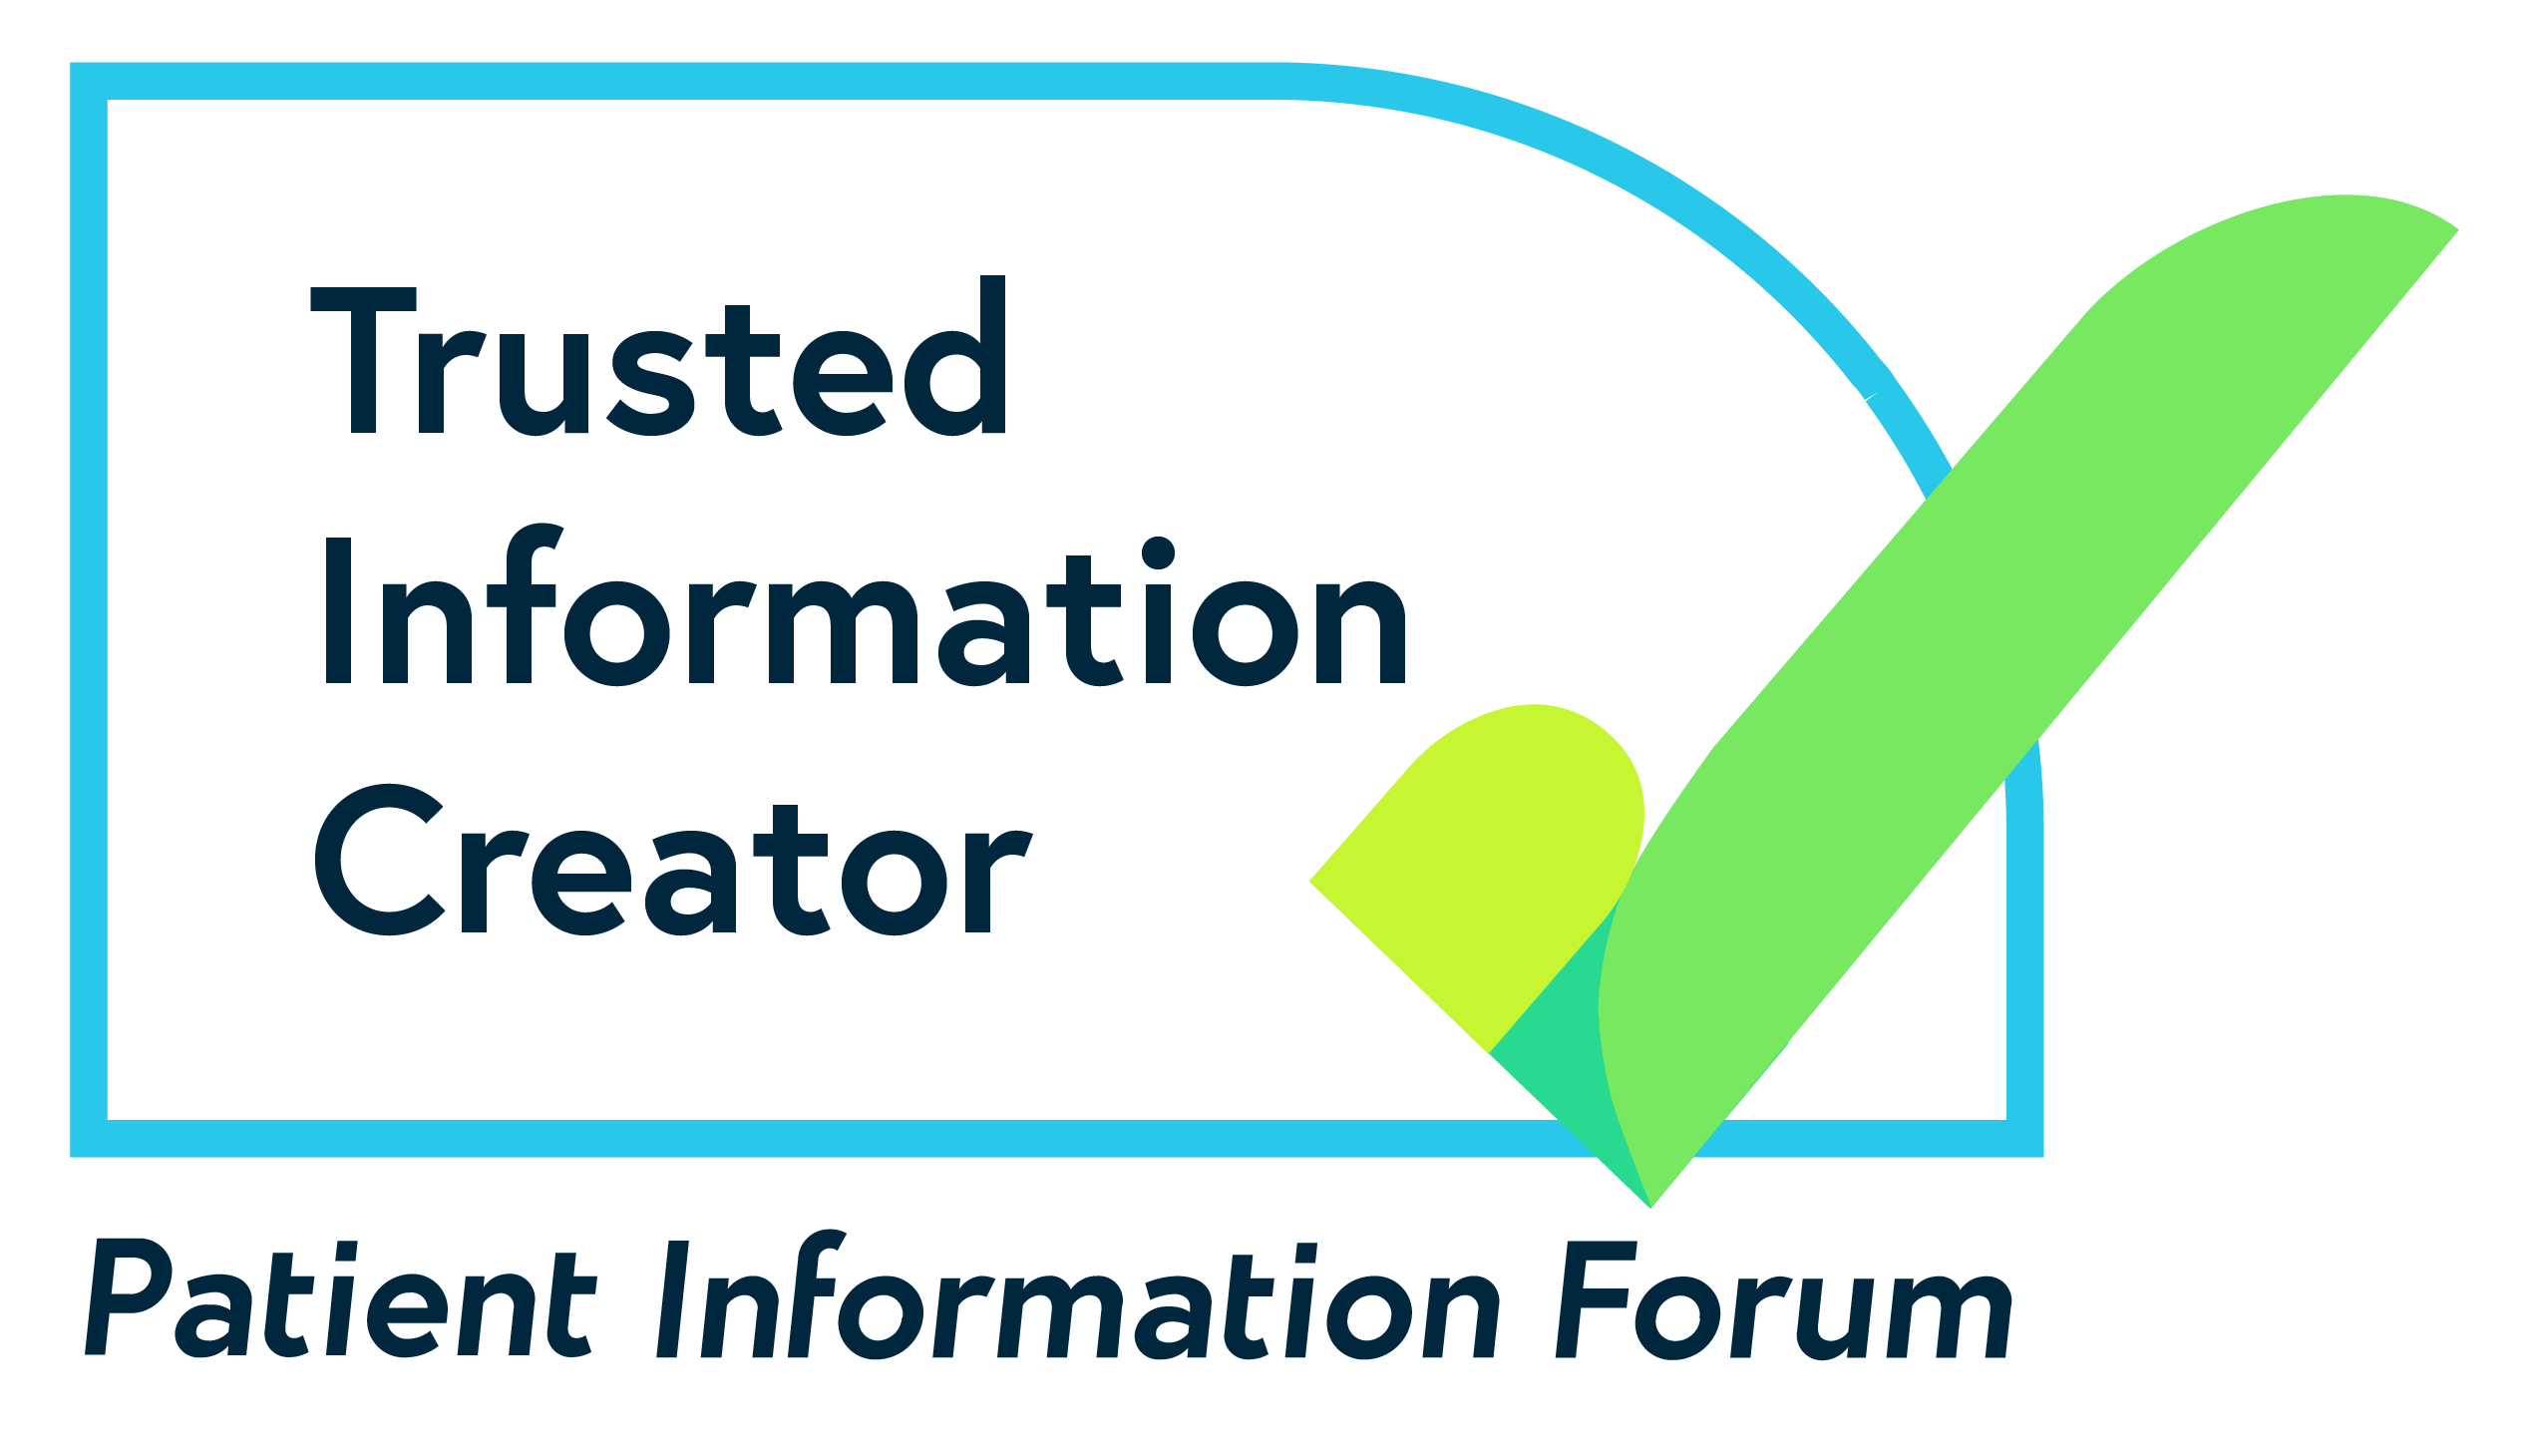 Trusted Information Creator Kitemark (PIF TICK).  Logo showing green a tick.